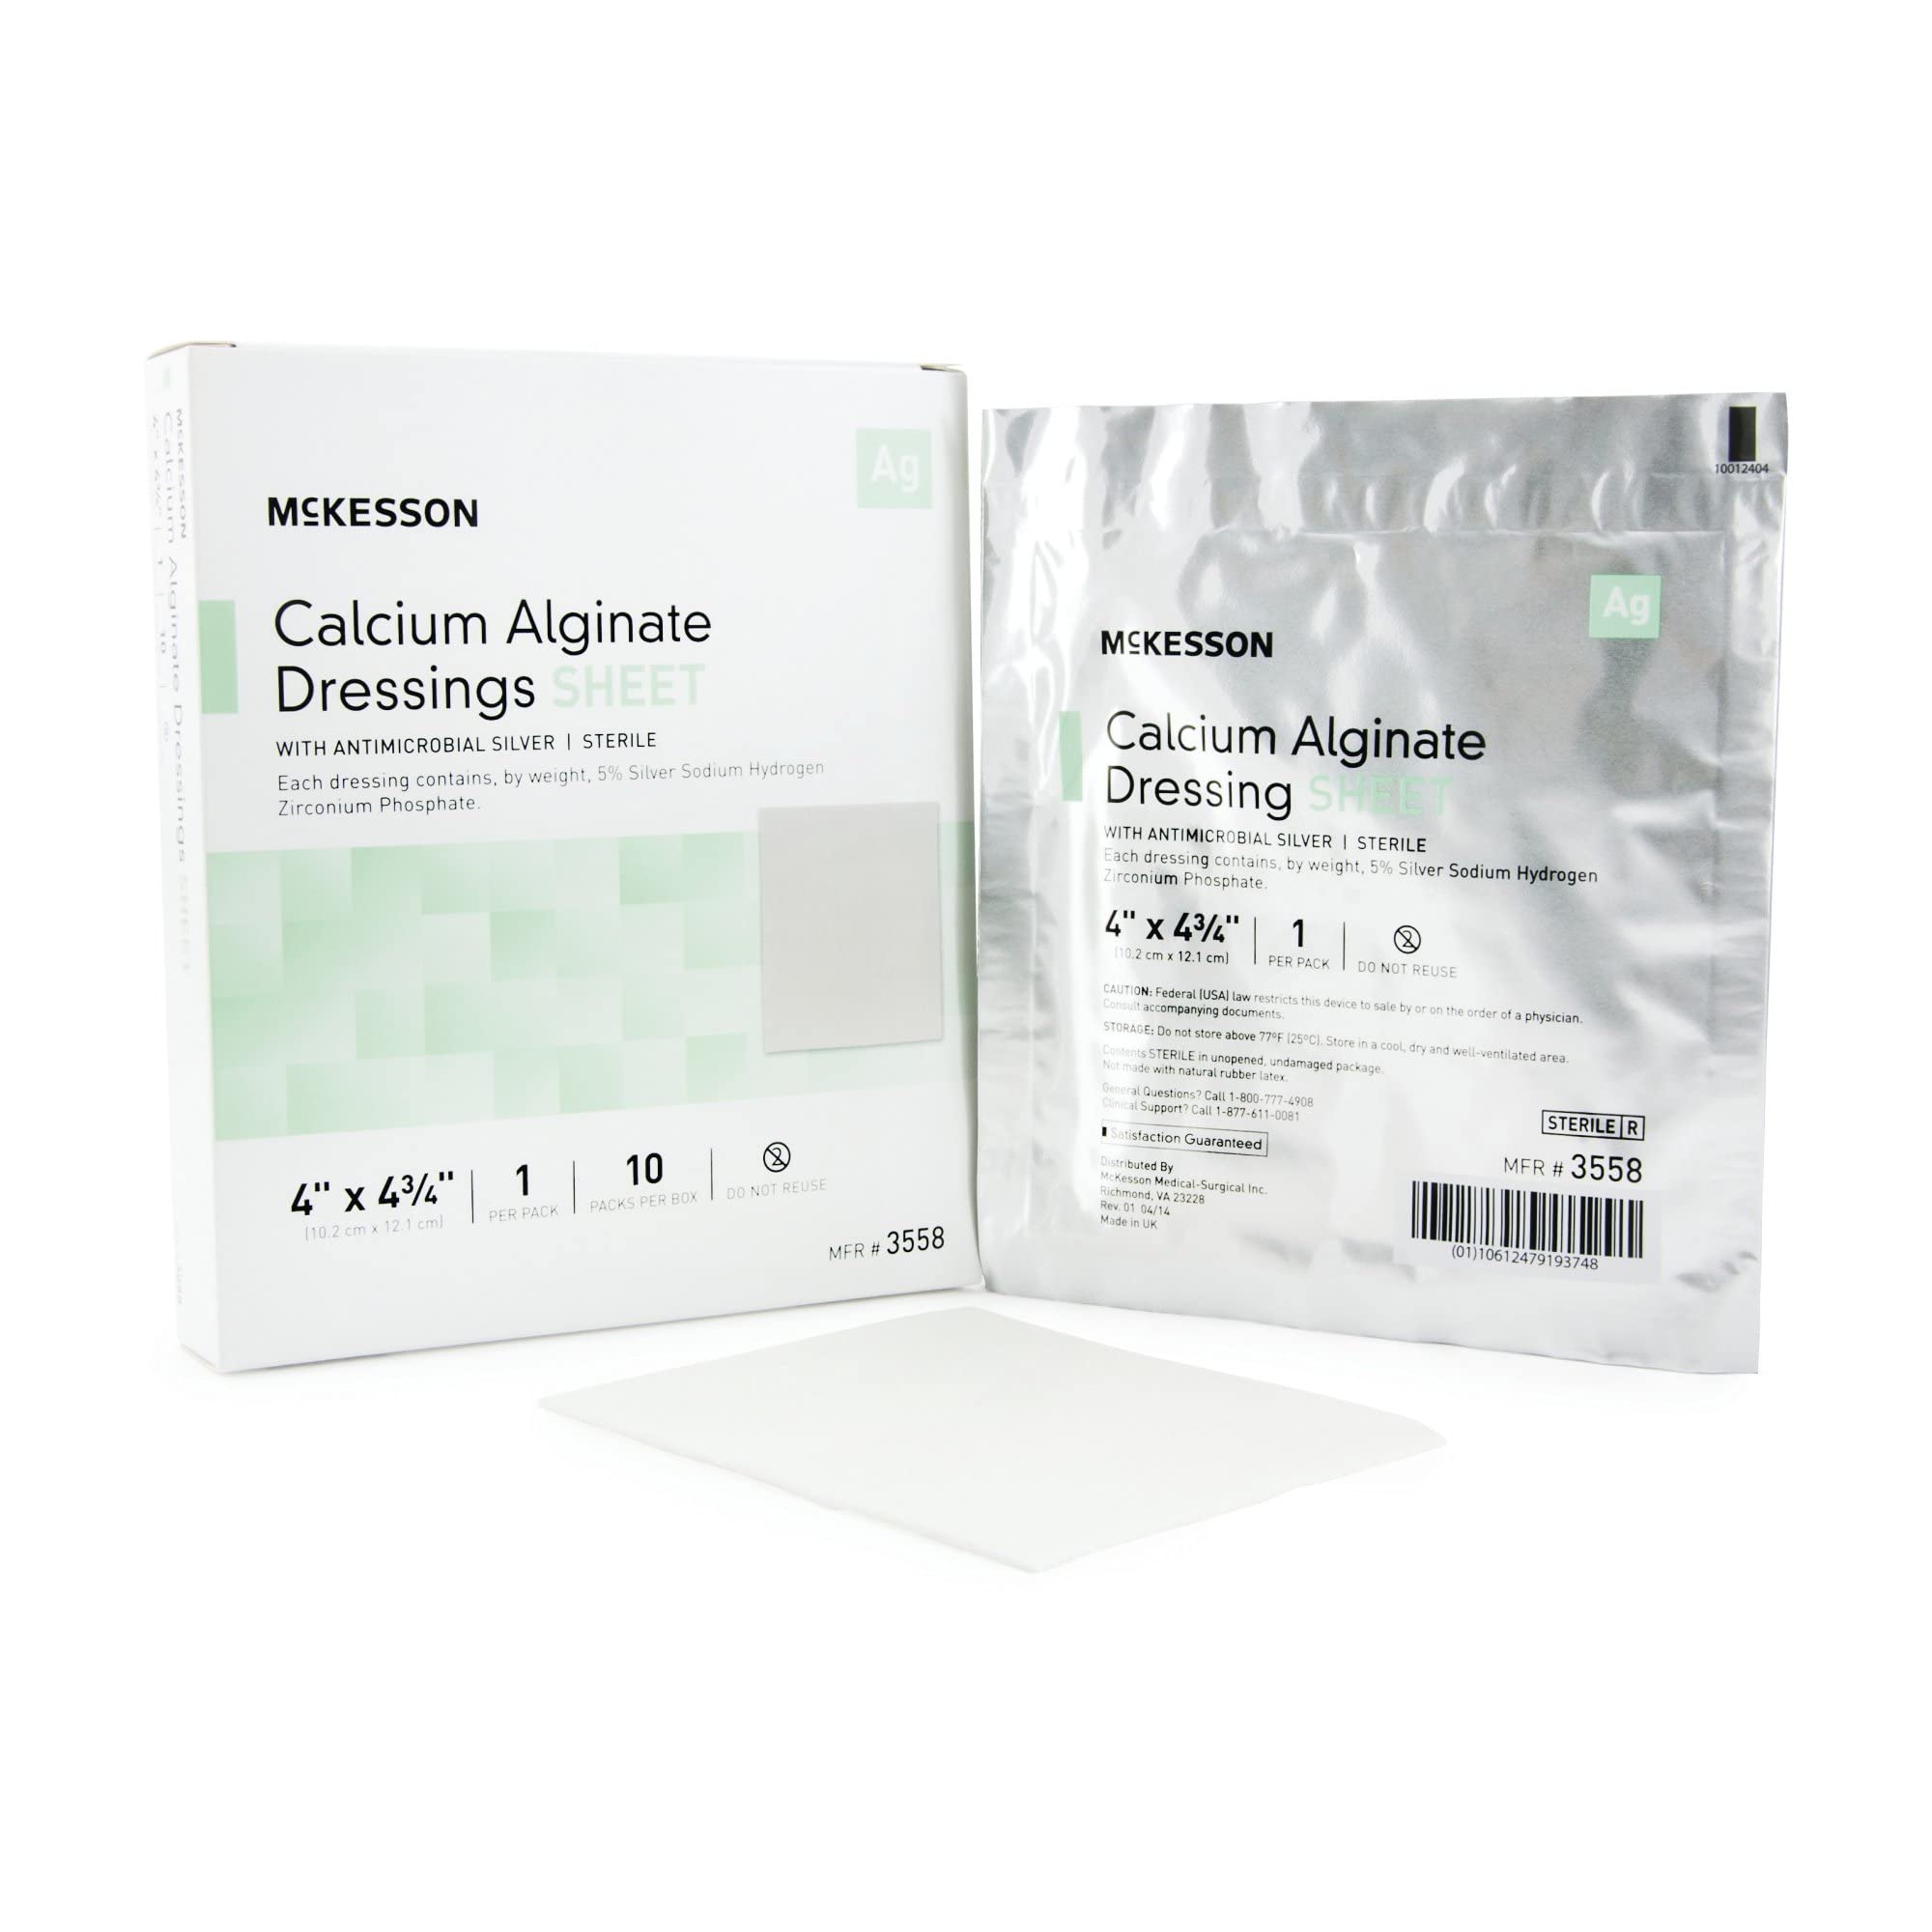 McKesson Calcium Alginate Dressing with Antimicrobial Silver, Sterile Gauze Pads, 4 in x 4 3/4 in, 10 Count